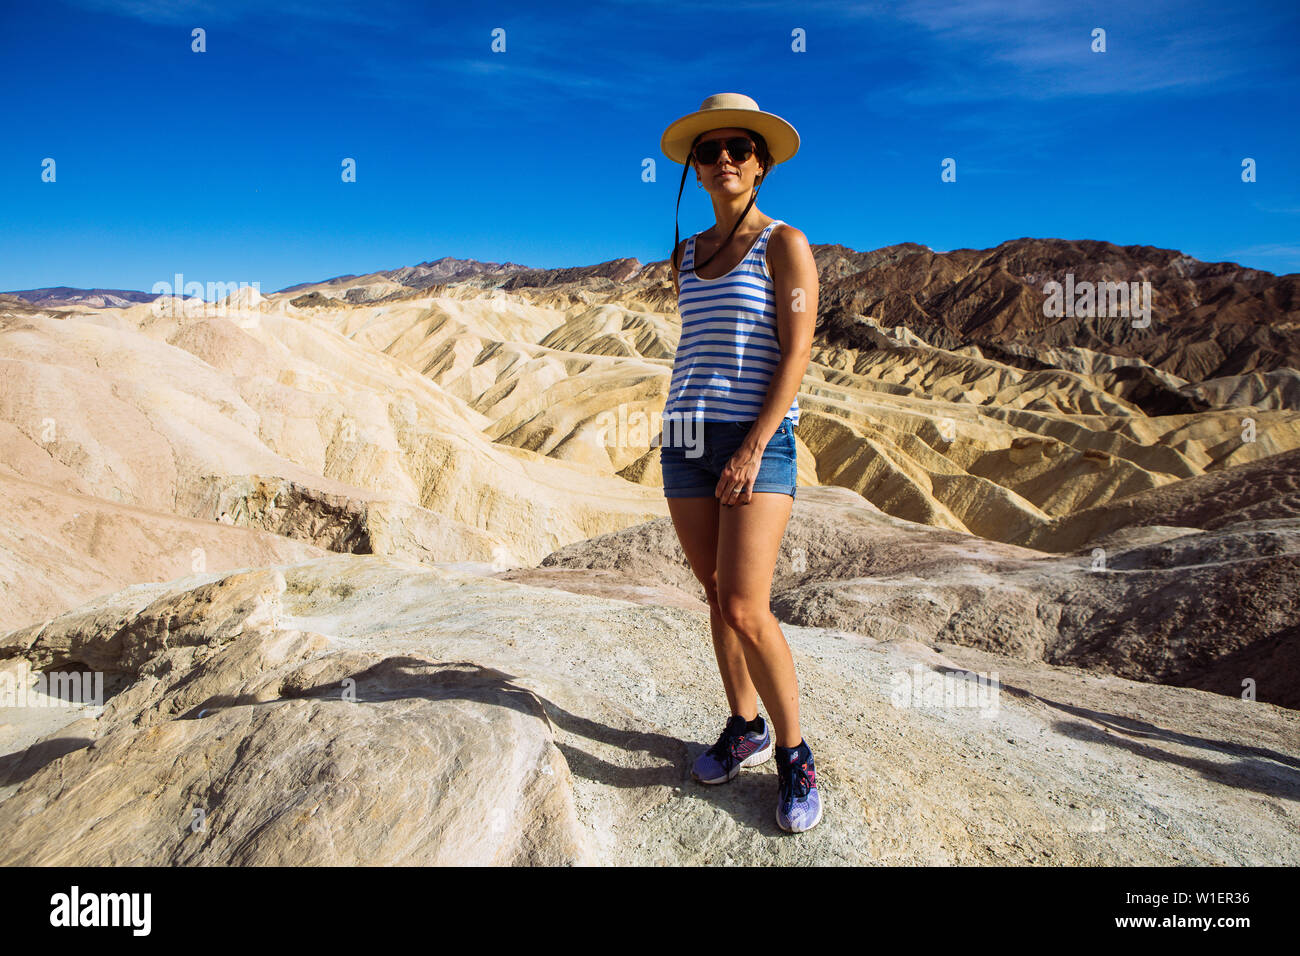 Tourist woman posing with hat and shades at Zabriskie Point, Furnace Creek, Death Valley National Park, California, USA Stock Photo